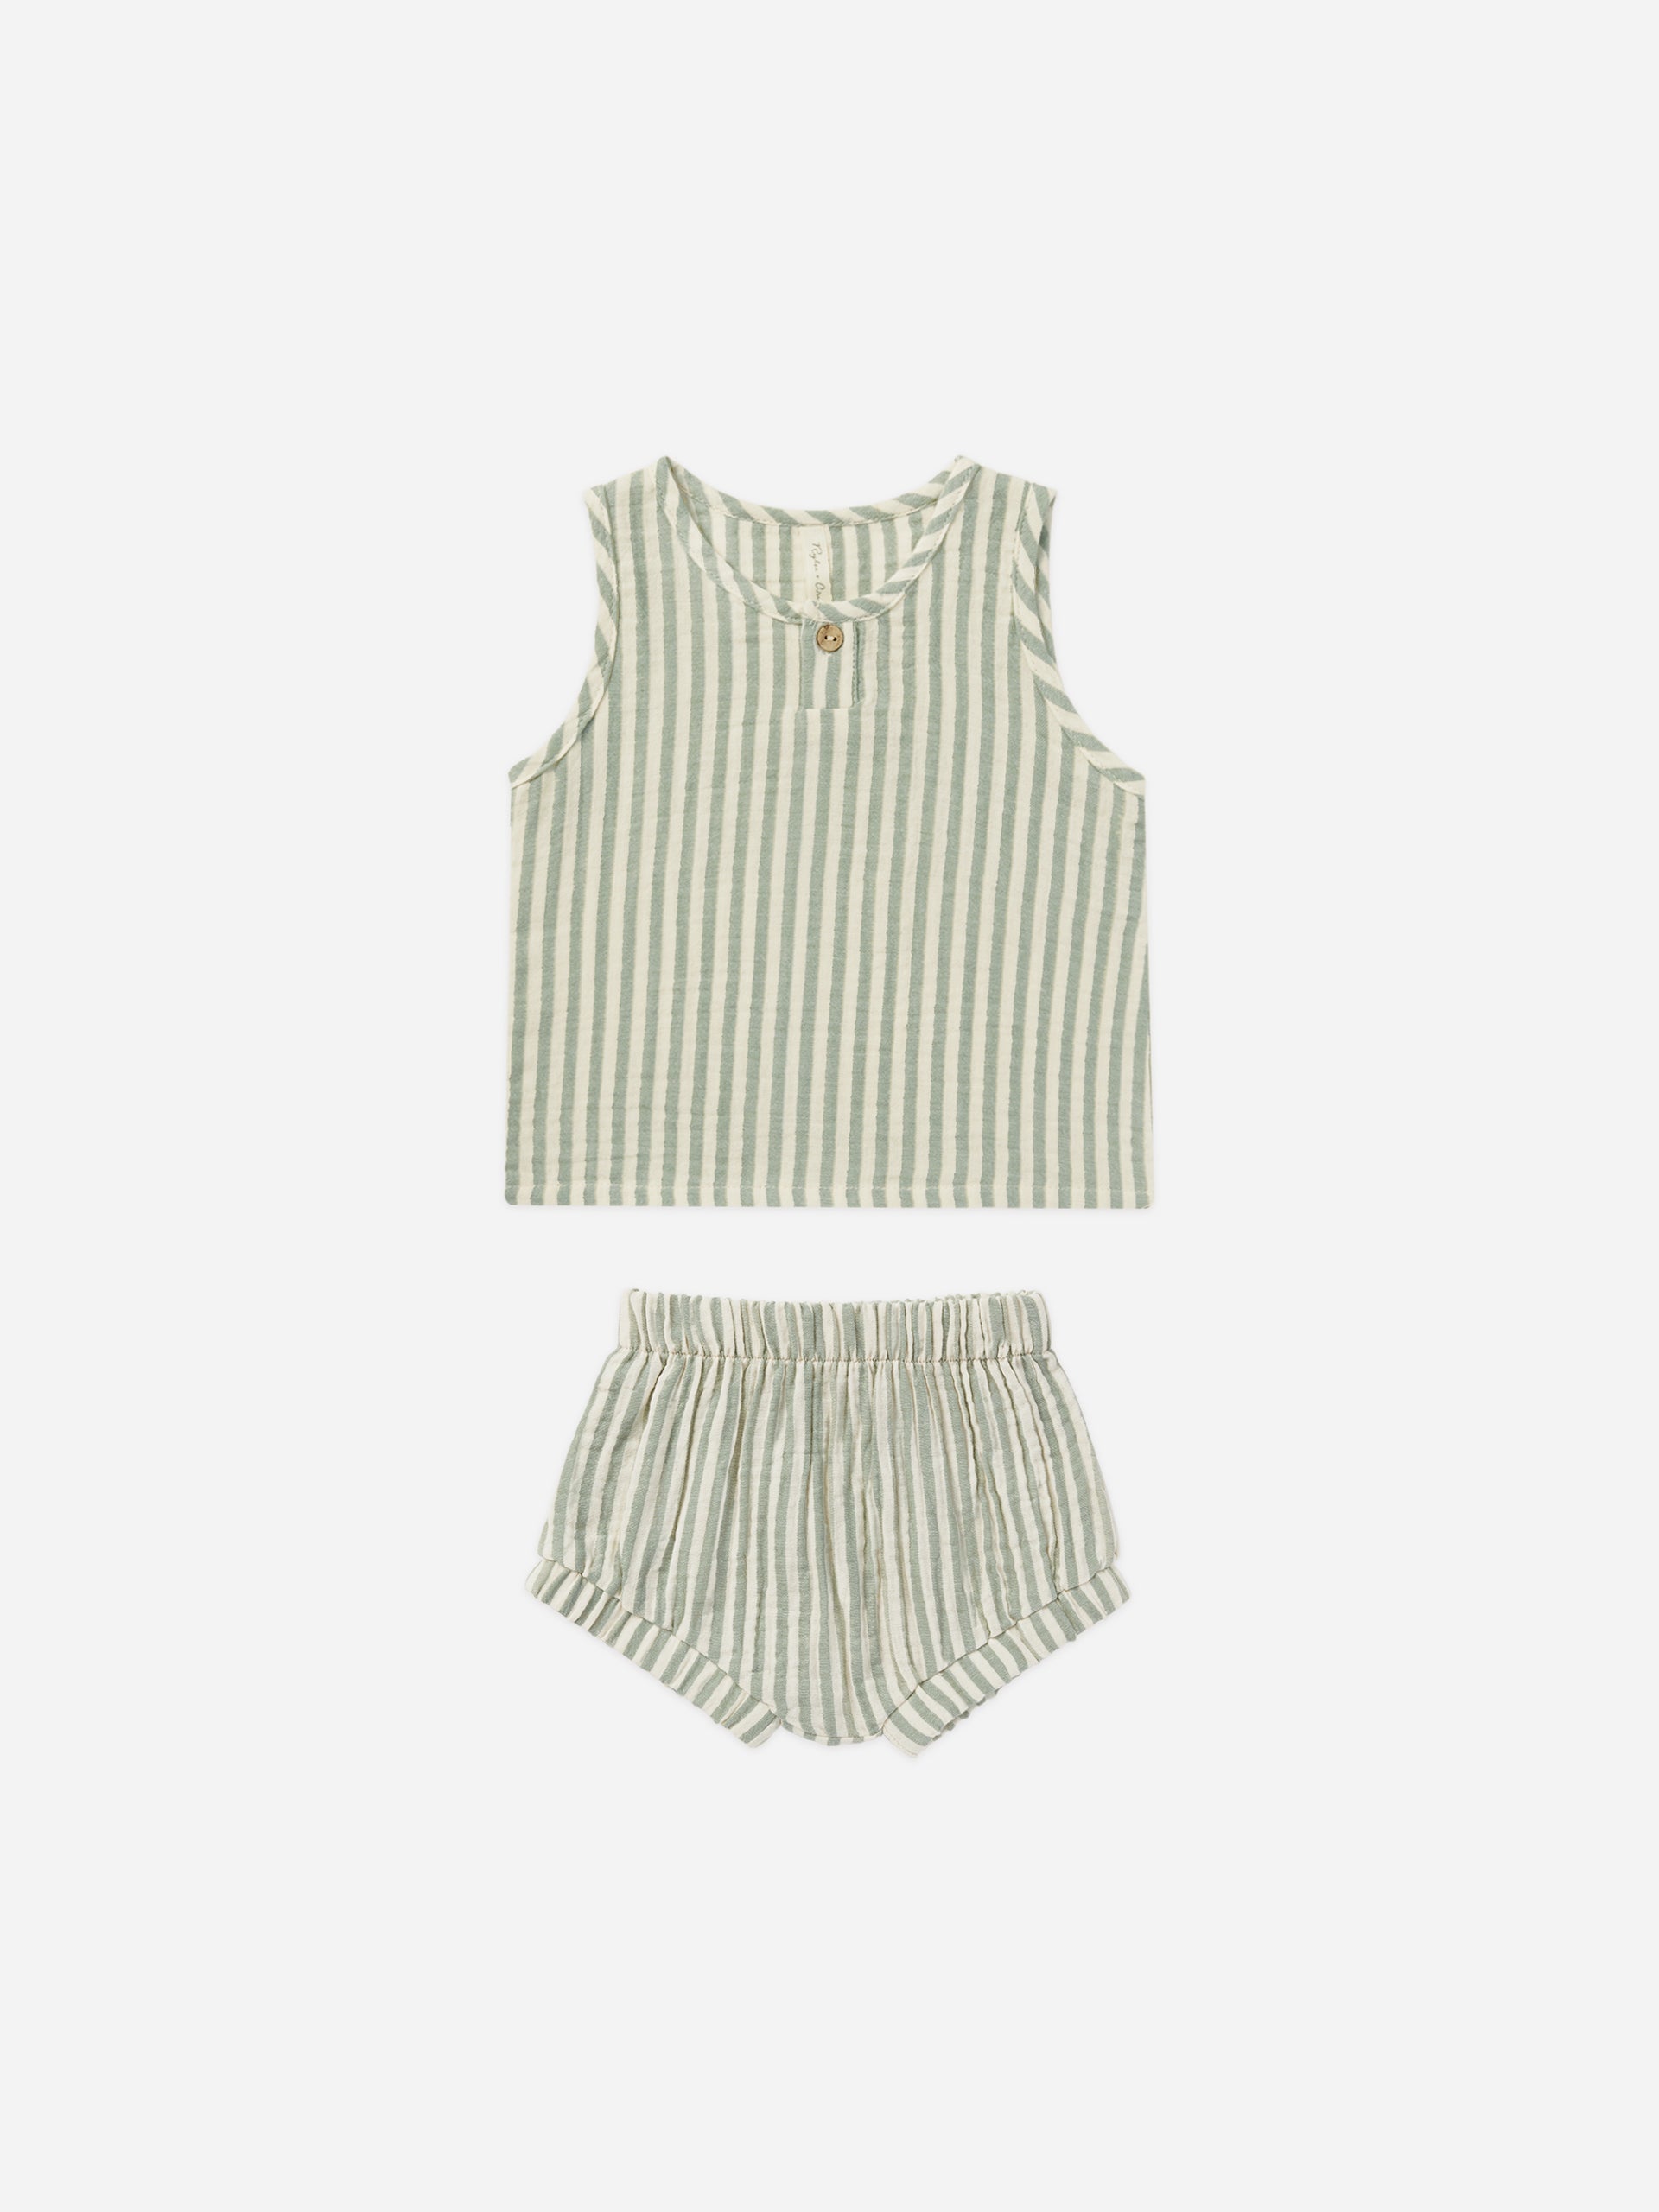 Baby Tank Set || Summer Stripe - Rylee + Cru | Kids Clothes | Trendy Baby Clothes | Modern Infant Outfits |